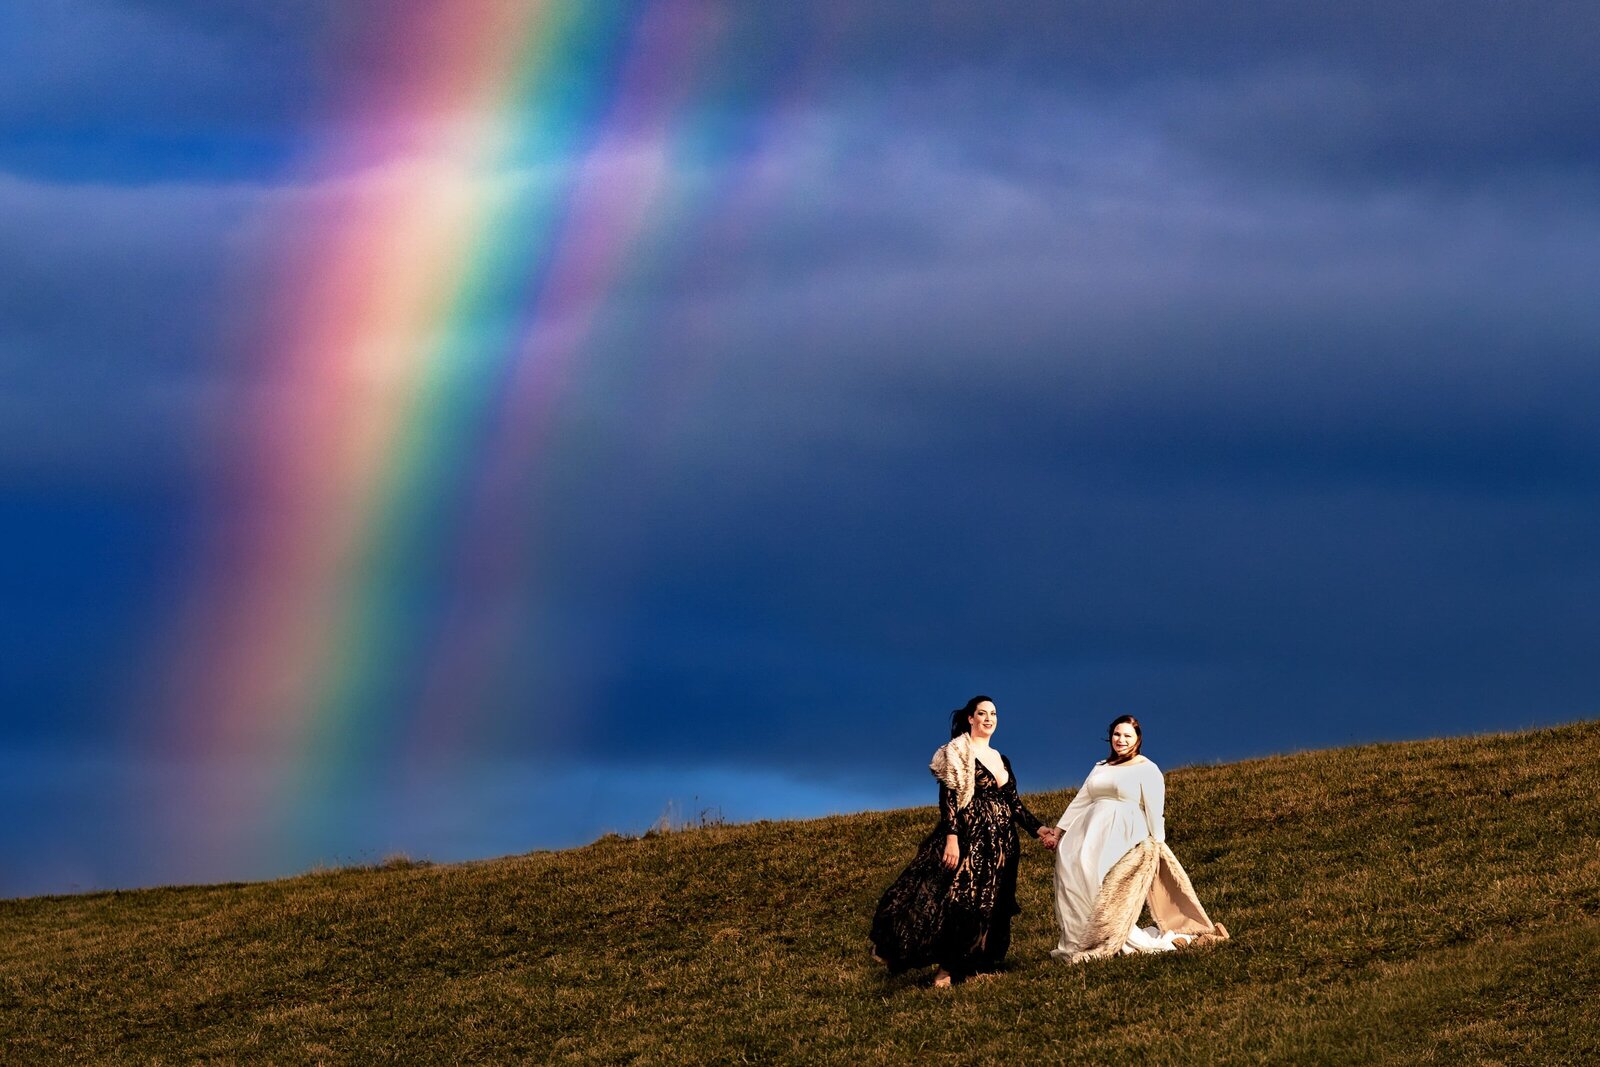 creative wedding photography of a same-sex couple standing in a field with a rainbow in the background